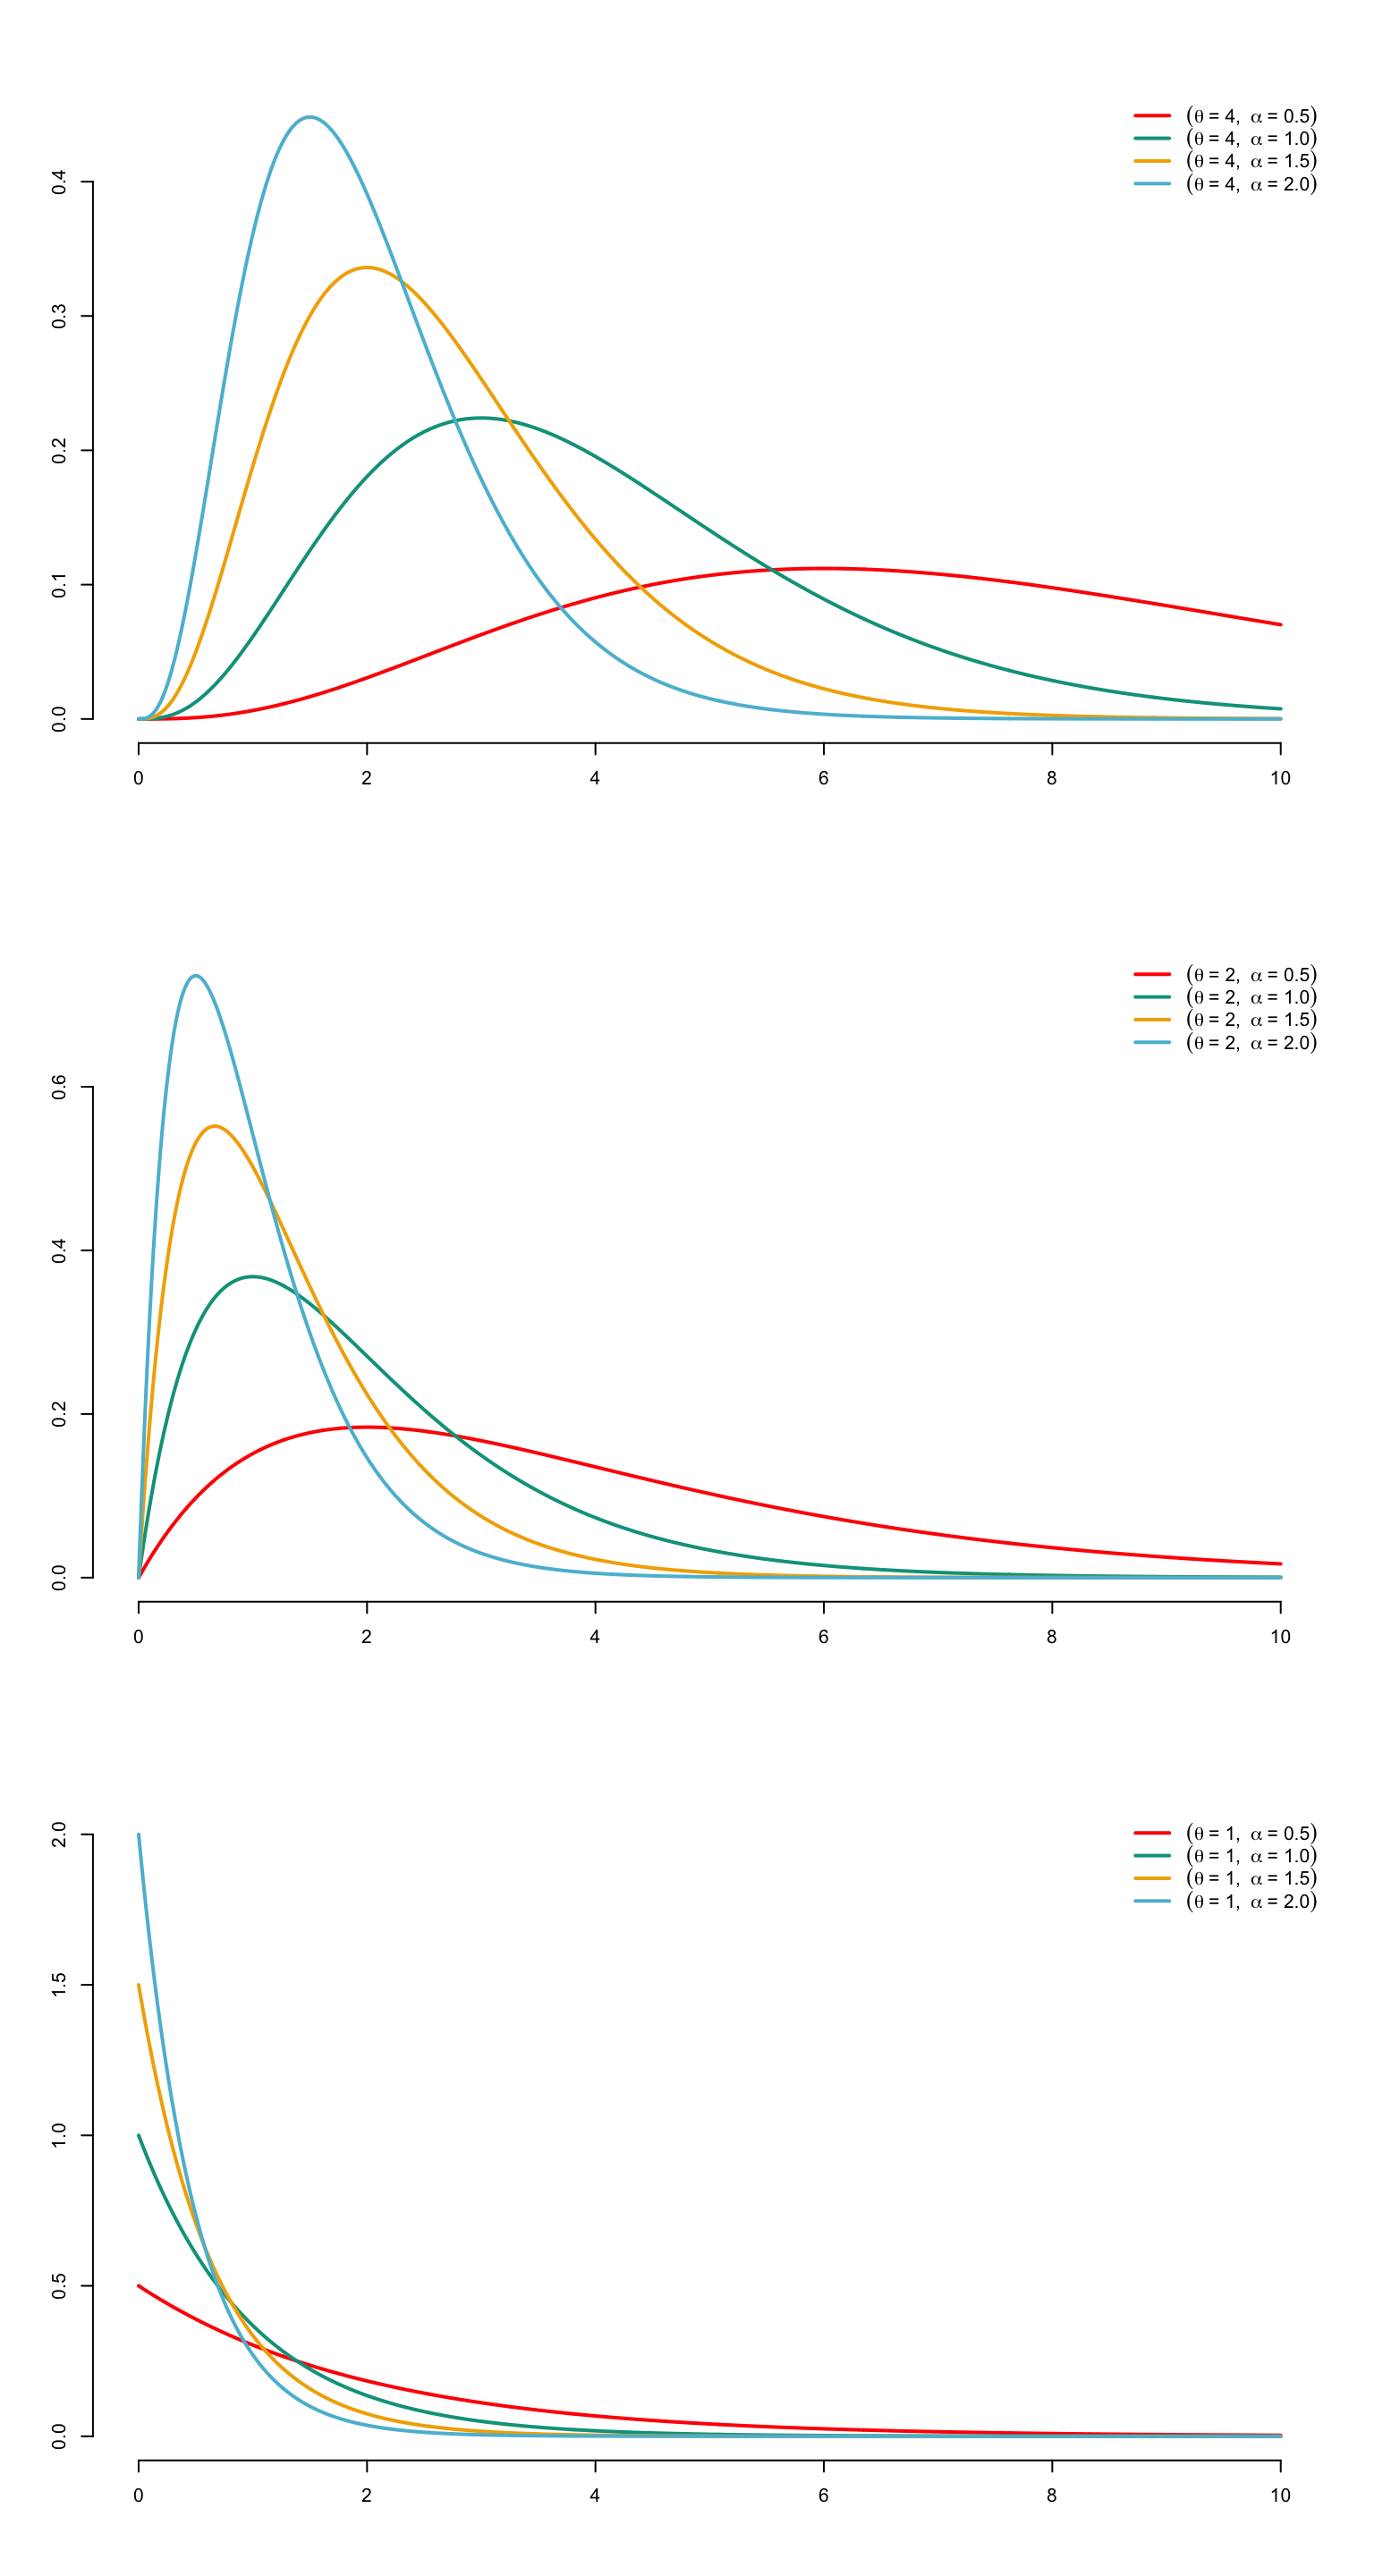 Densities of gamma distributions with parameters $\tau=1/4$ (on top), 1/2 (in the middle) and 1 (belows) for differnt values for $\alpha$